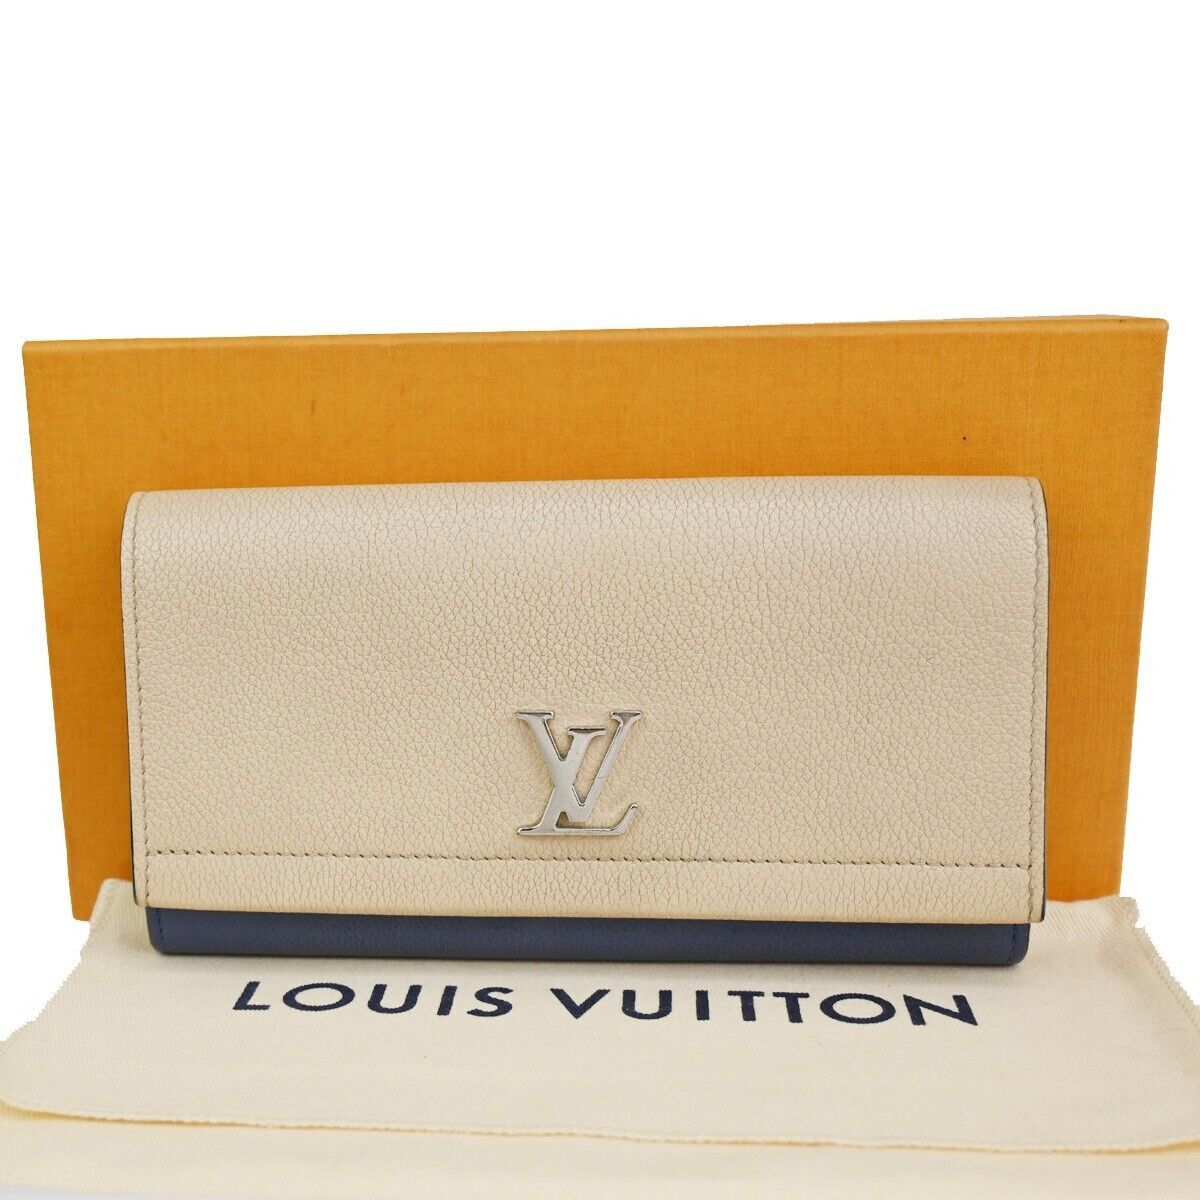 LOUIS VUITTON This Is Not Monogram Portefeuille Brazza Bifold Long Wallet  Brown M81596 RFID